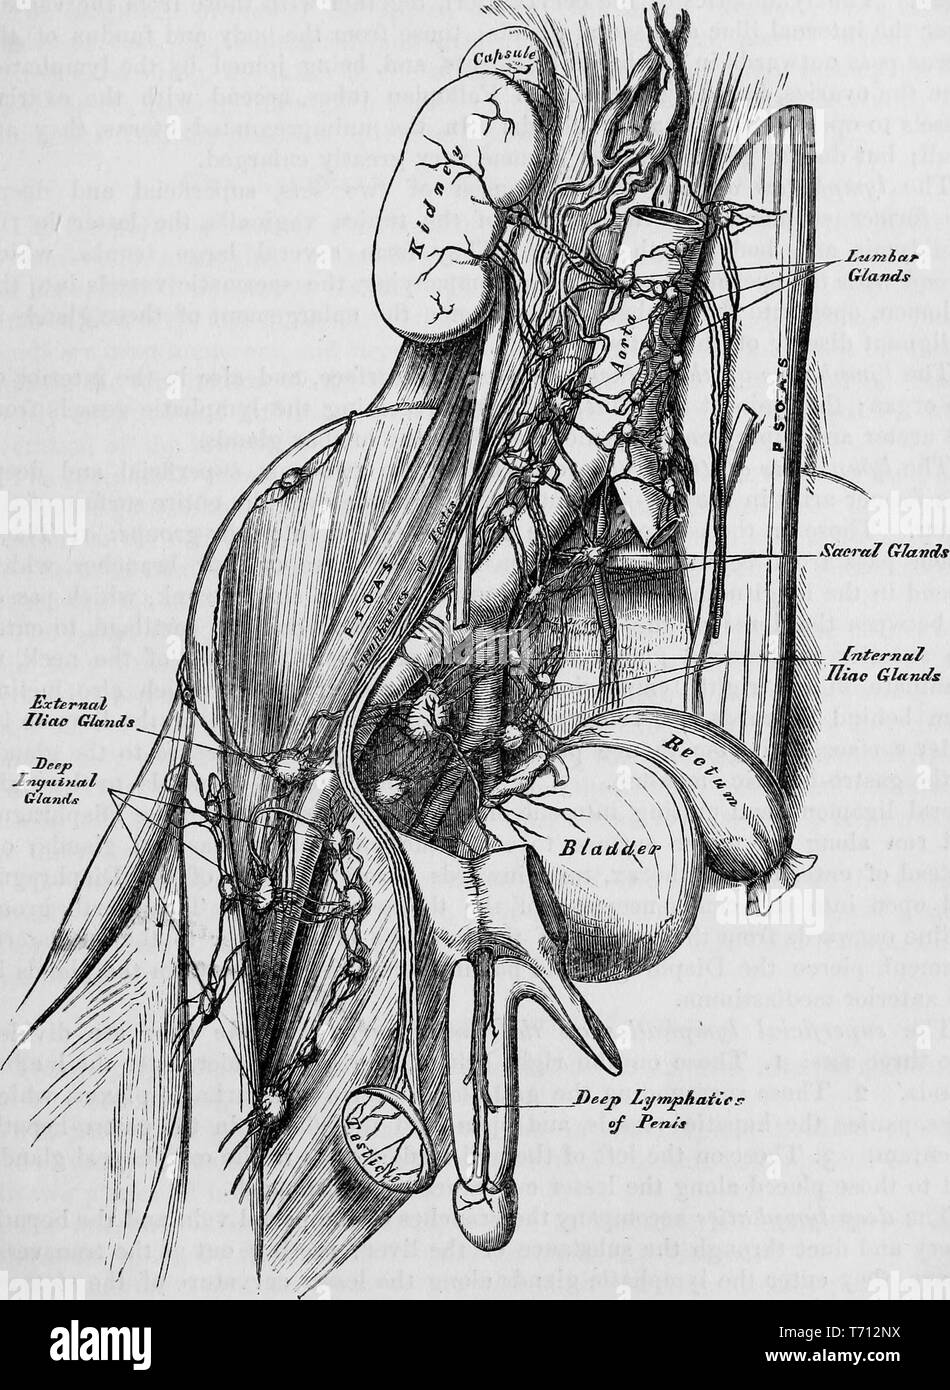 Black and white print showing a profile view of male internal anatomy, including the bladder, rectum, kidney and aortic valve, and focusing on the prostate lymphatic system, with labels indicating the external and internal iliac lymph nodes, the sacral lymph nodes, and the inguinal lymph nodes, illustrated by Henry Vandyke Carter, and published in Henry Gray's medical volume 'Anatomy, descriptive and surgical', 1860. Courtesy Internet Archive. () Stock Photo